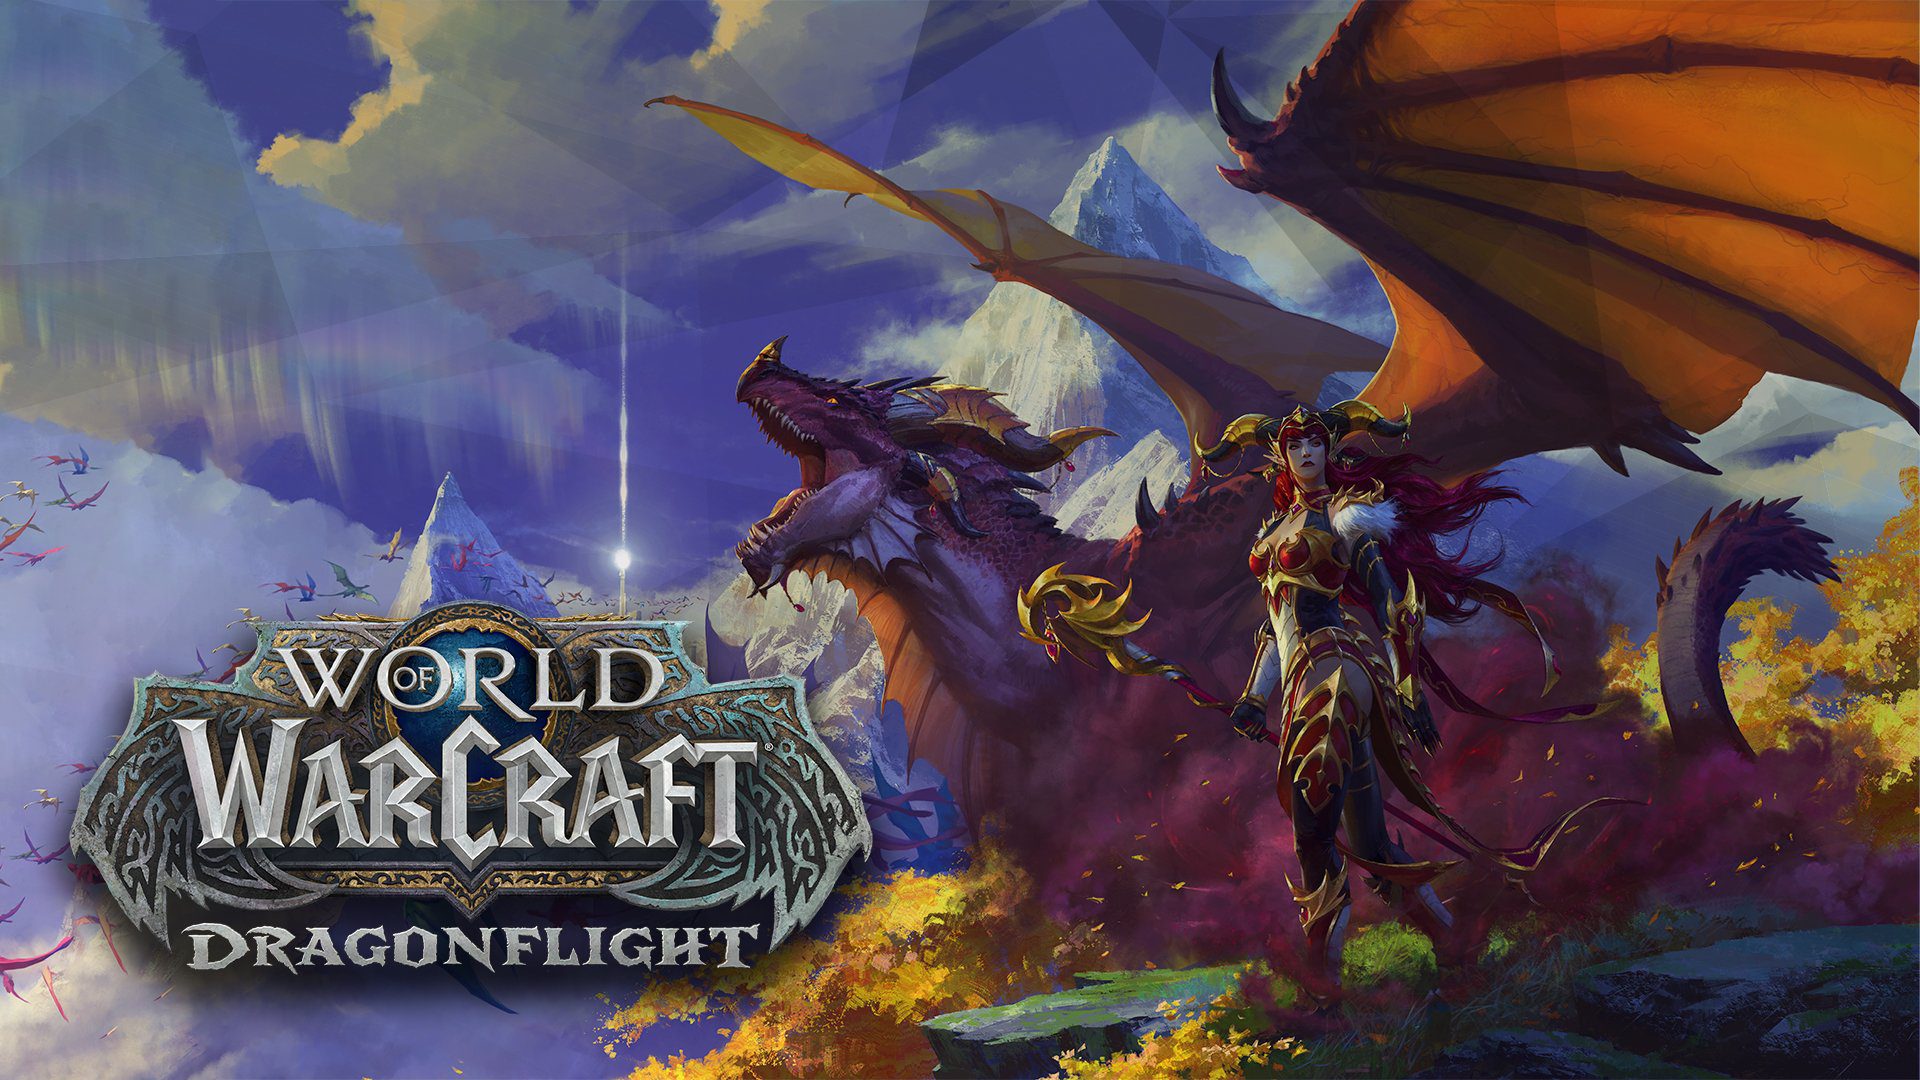 WoW Dragonflight will be released in November Confirmed!